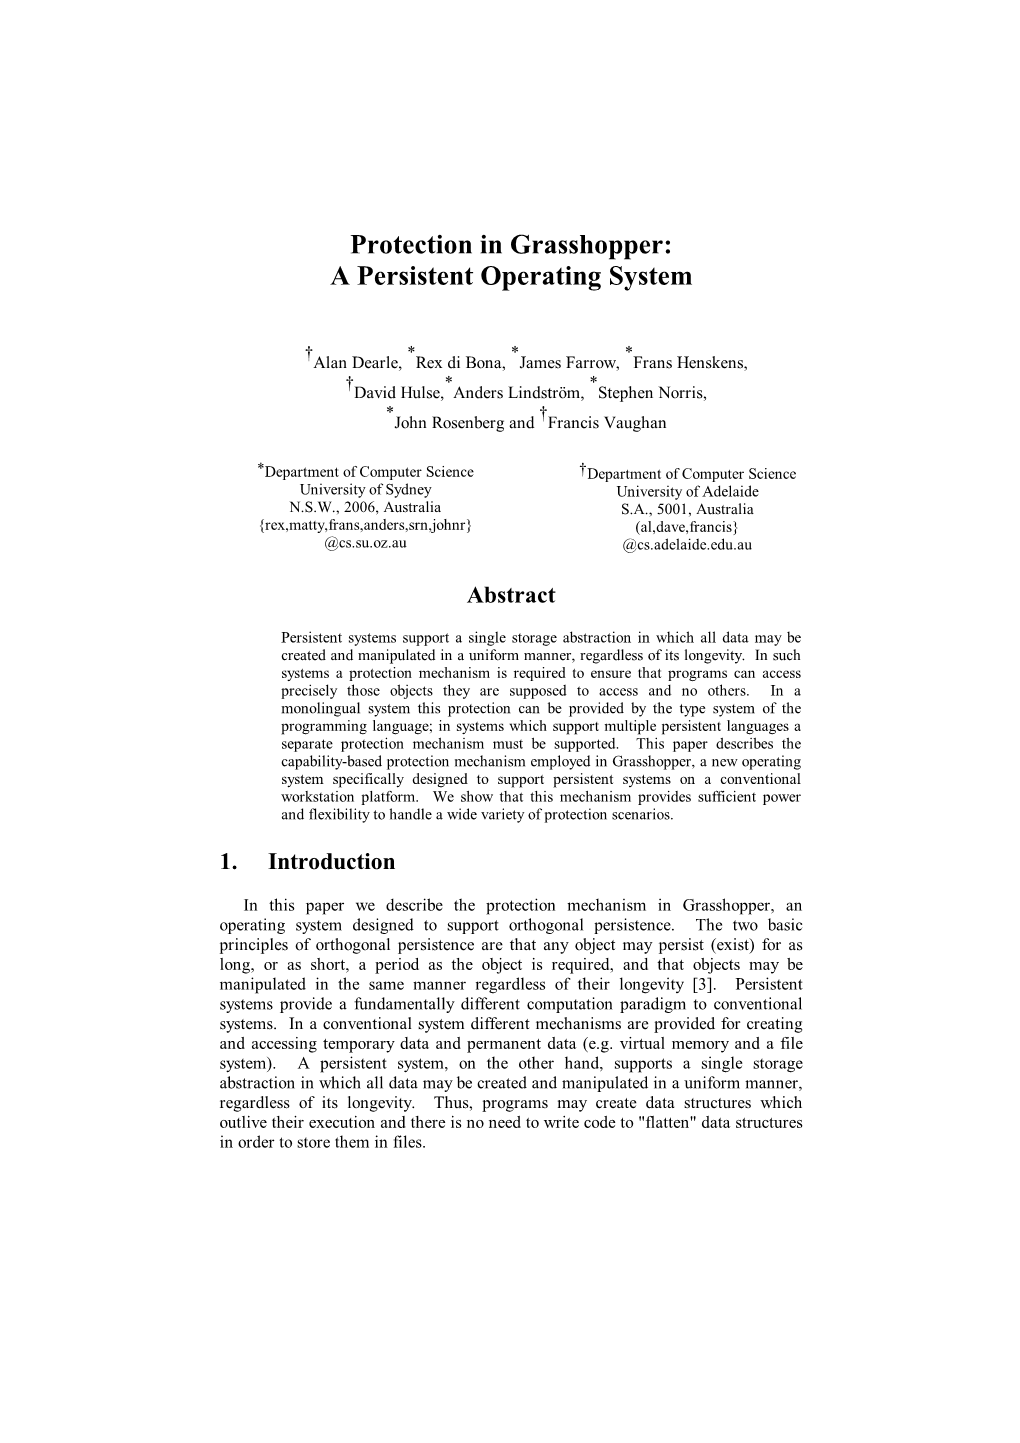 Protection in Grasshopper: a Persistent Operating System